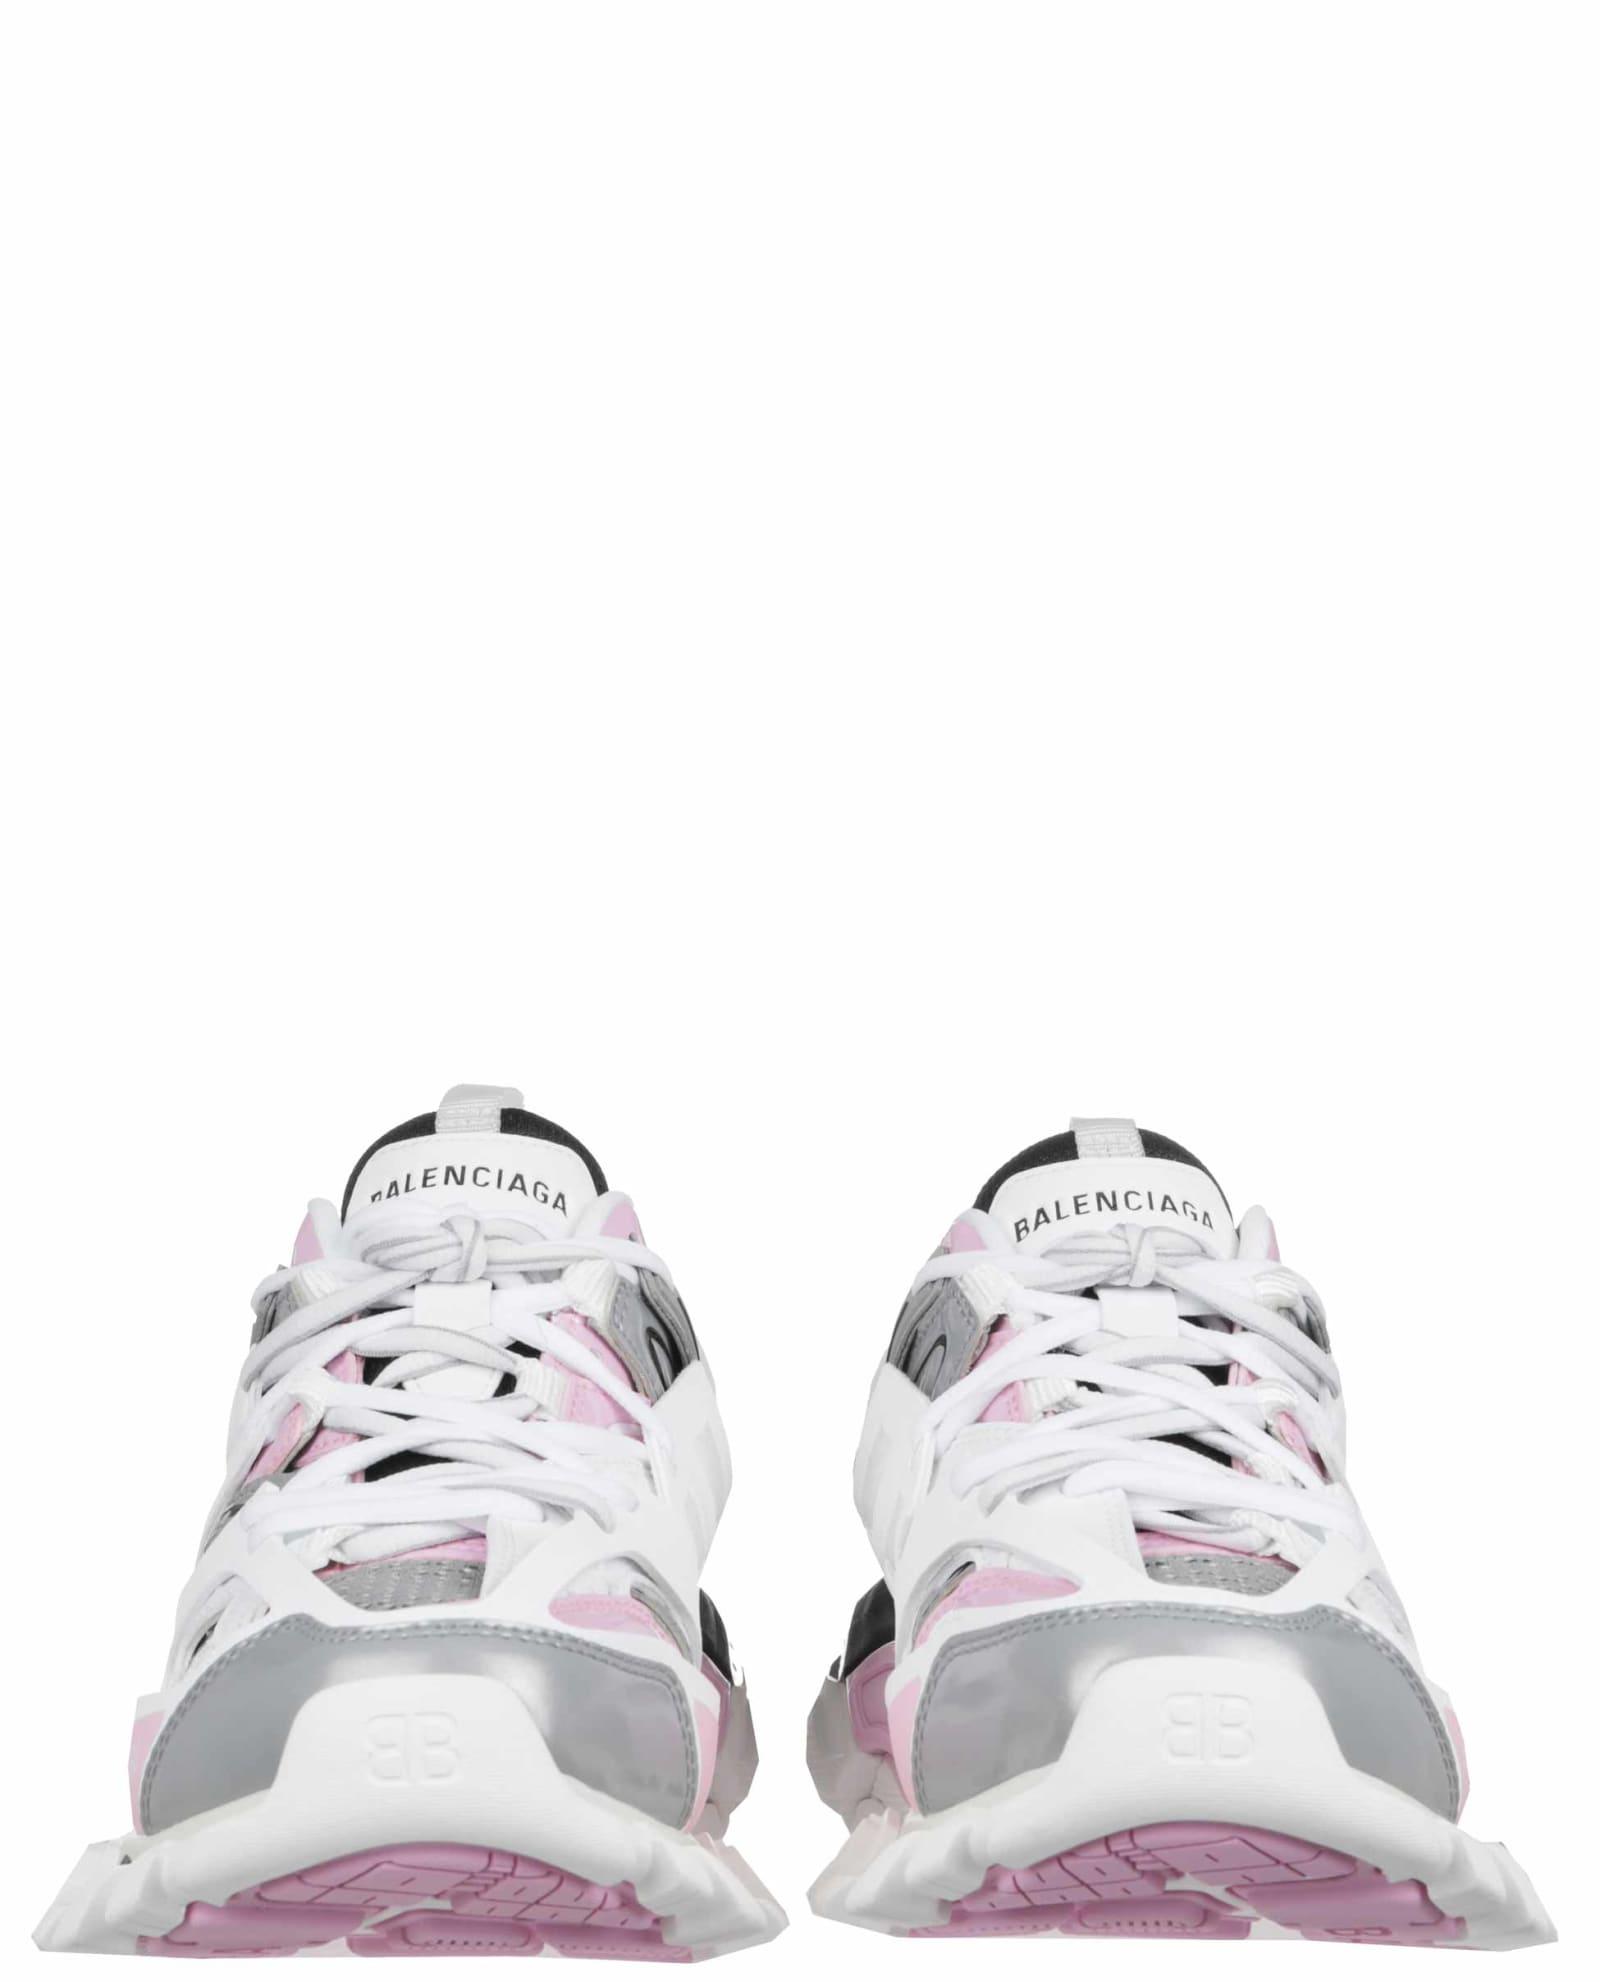 How to style these Balenciaga Track sneakers? : r/Sneakers